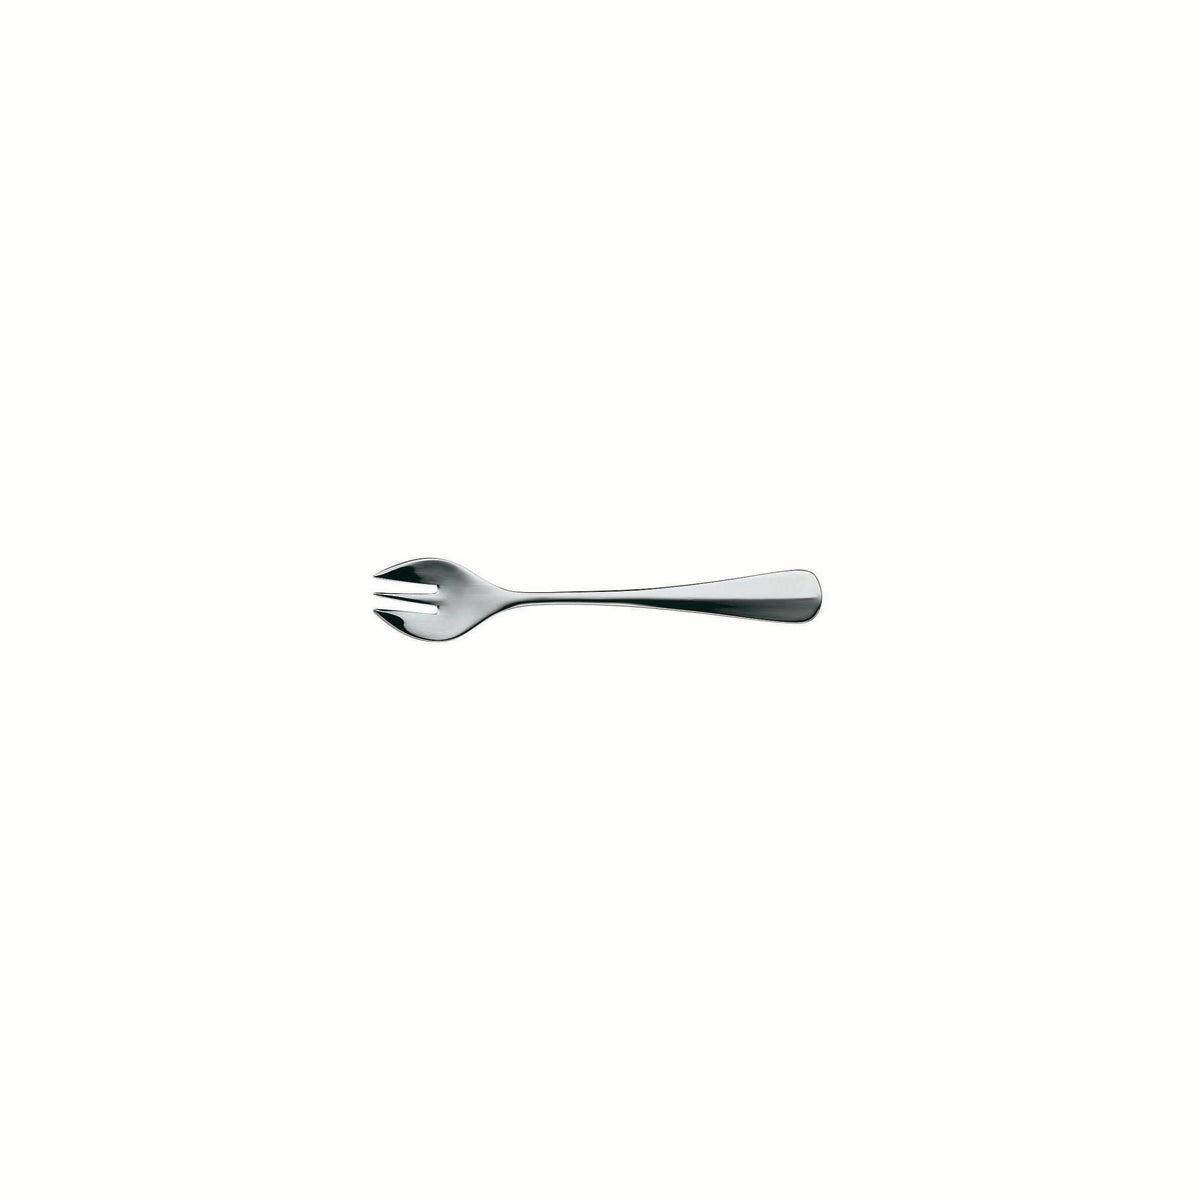 01.0140.6060 WMF Baguette Oyster Fork Silverplated Tomkin Australia Hospitality Supplies